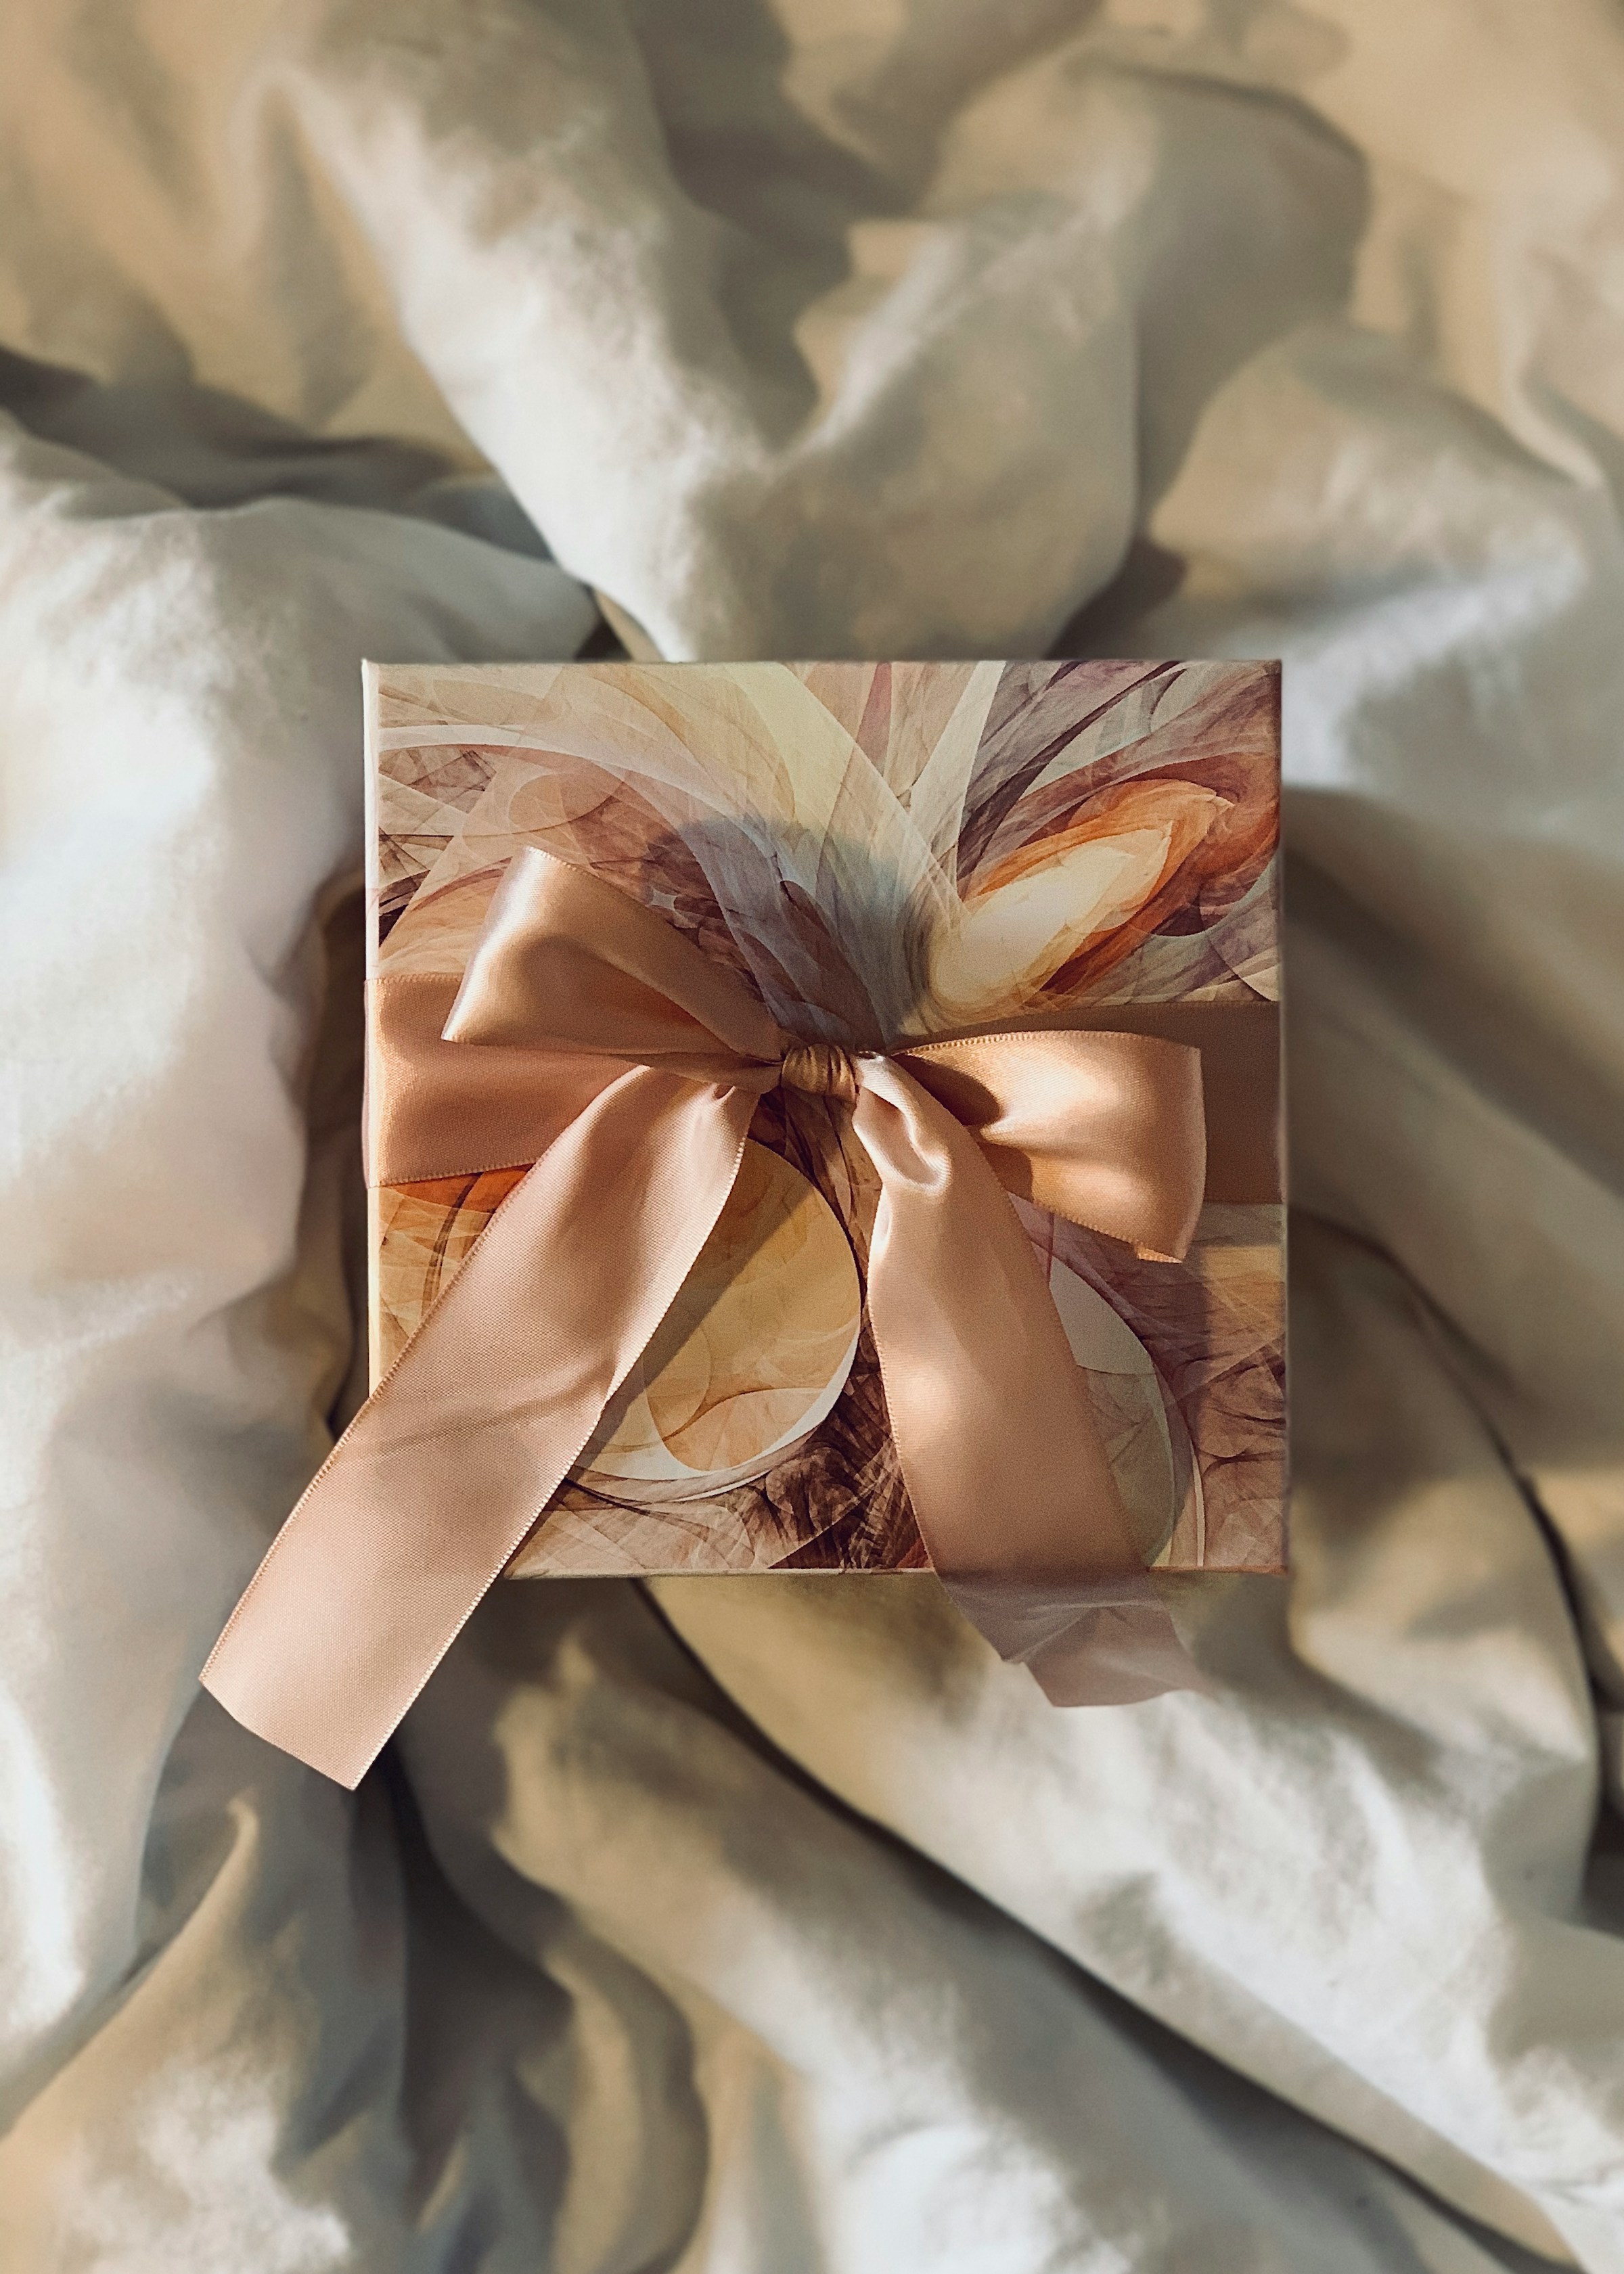 A gift box with a bow | Source: Pexels